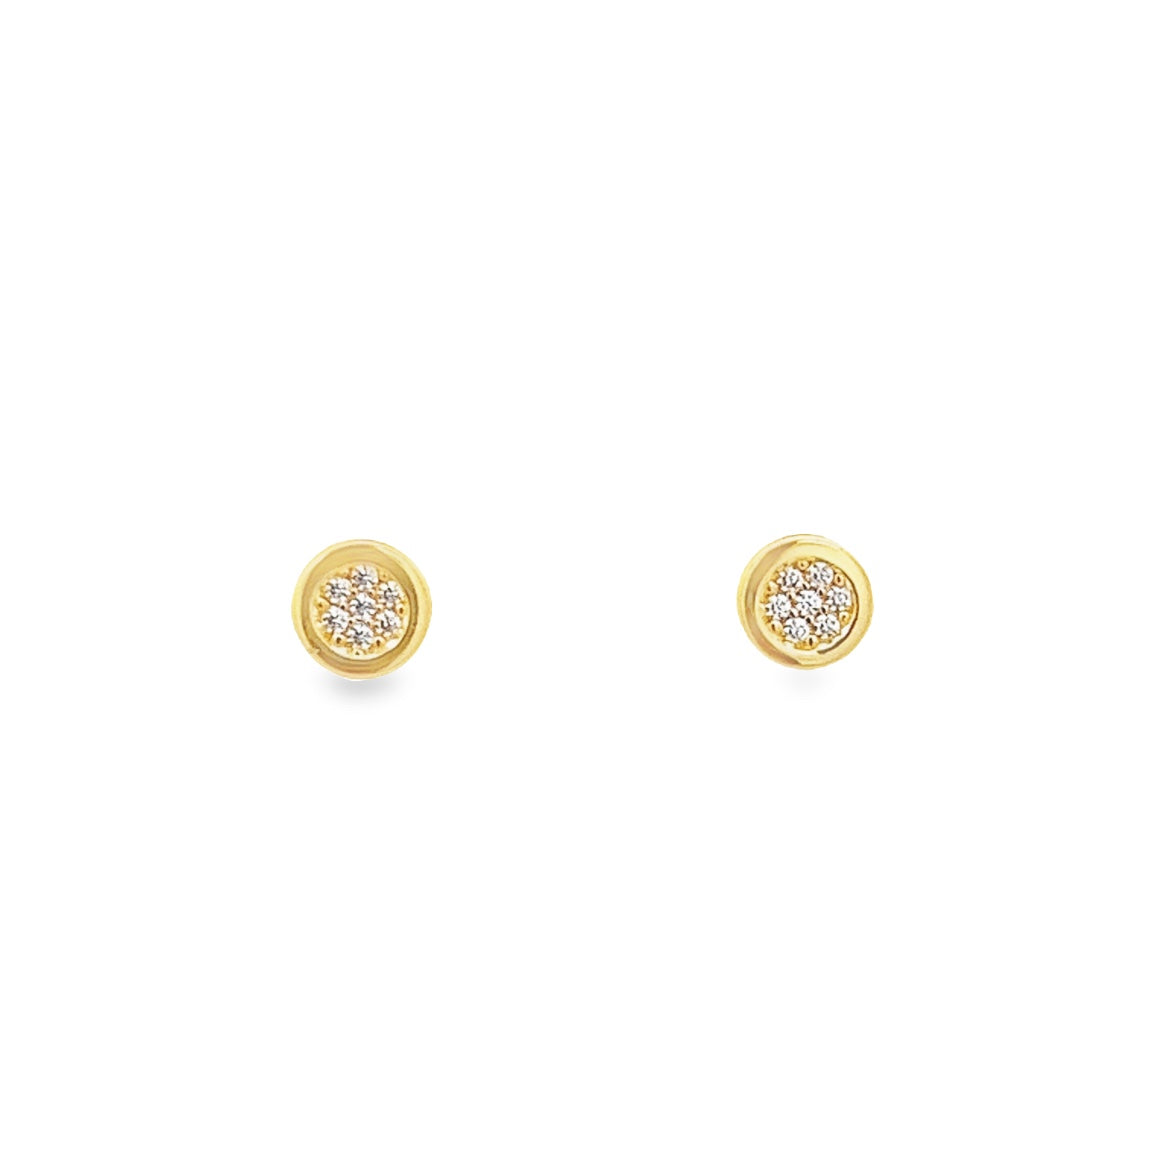 14K GOLD BESEL ROUND EARRINGS WITH CRYSTALS